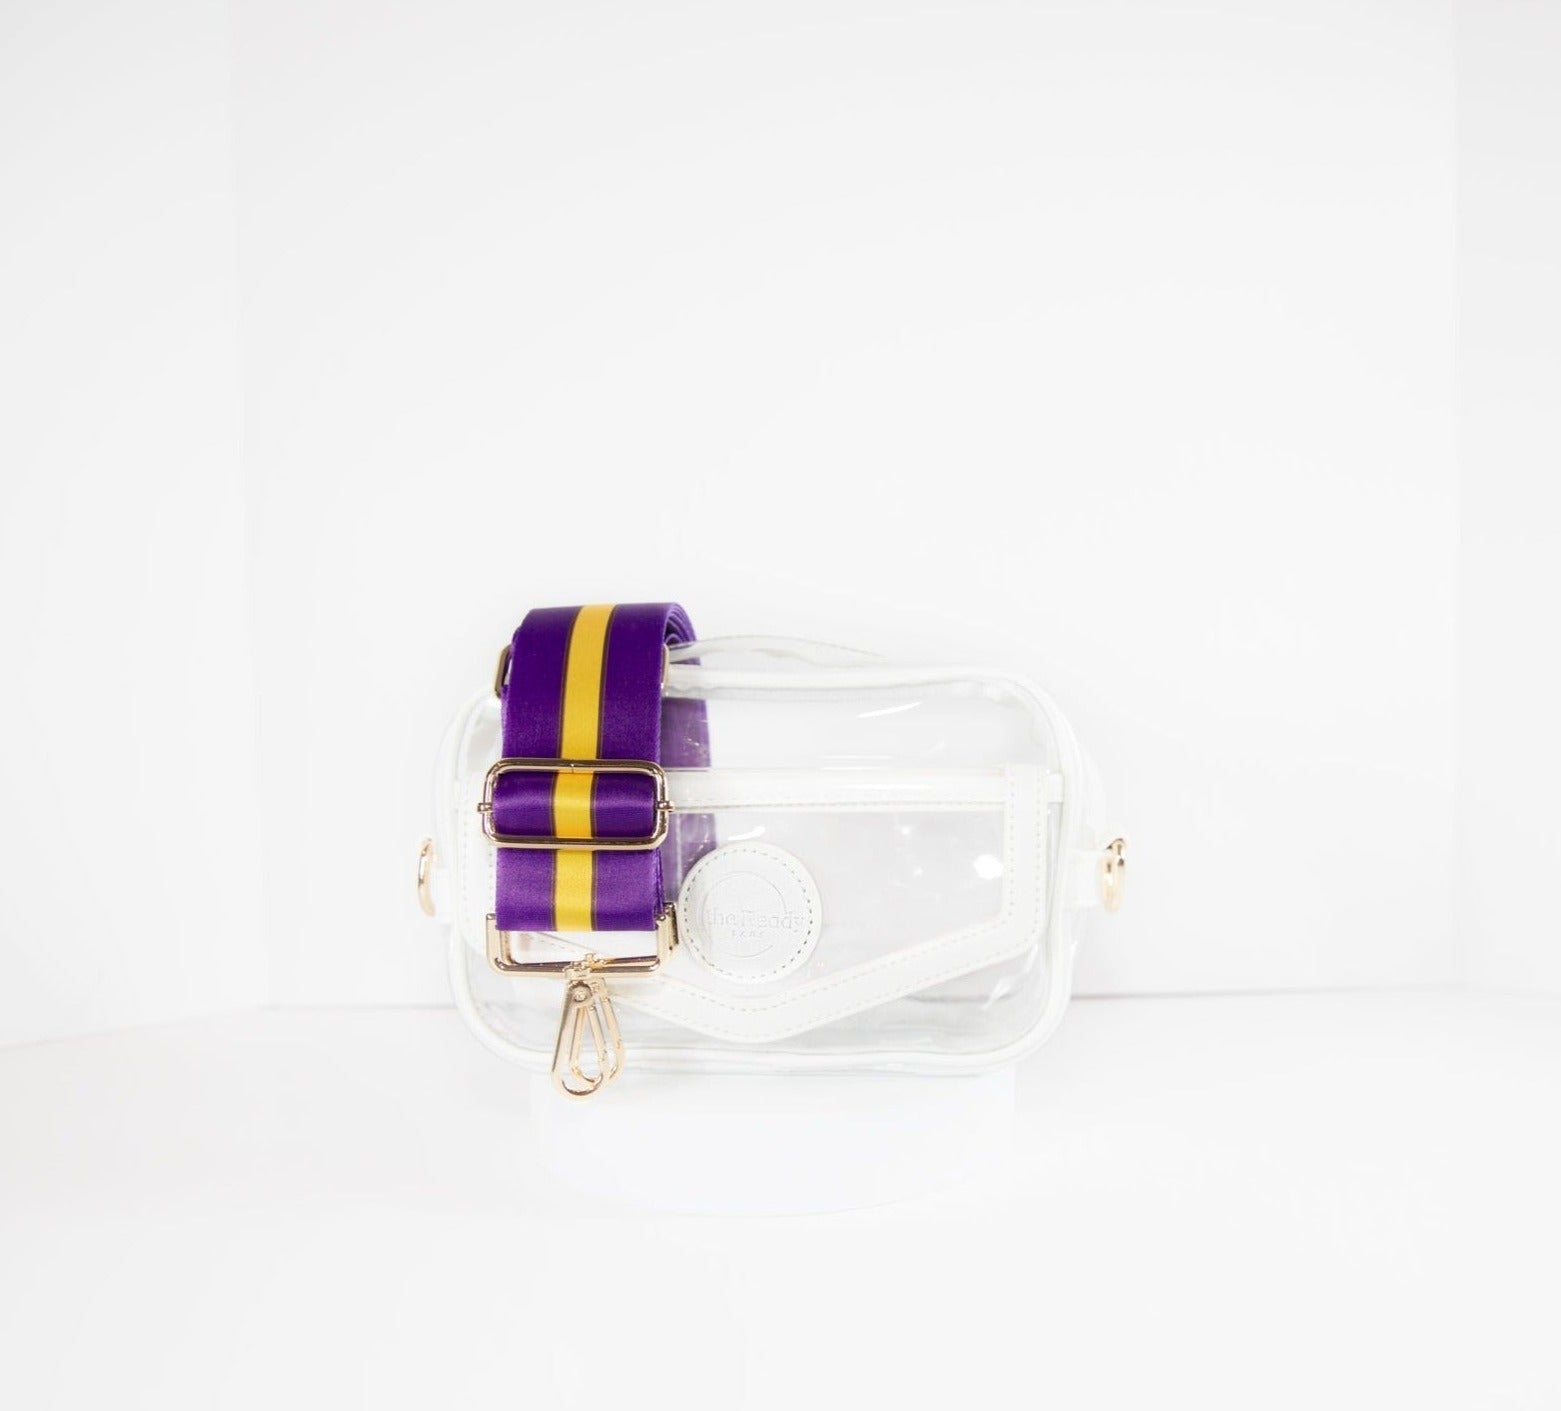 Clear Stadium Bag in white leather trim, front facing, with strap colors for LSU Tiger fans.